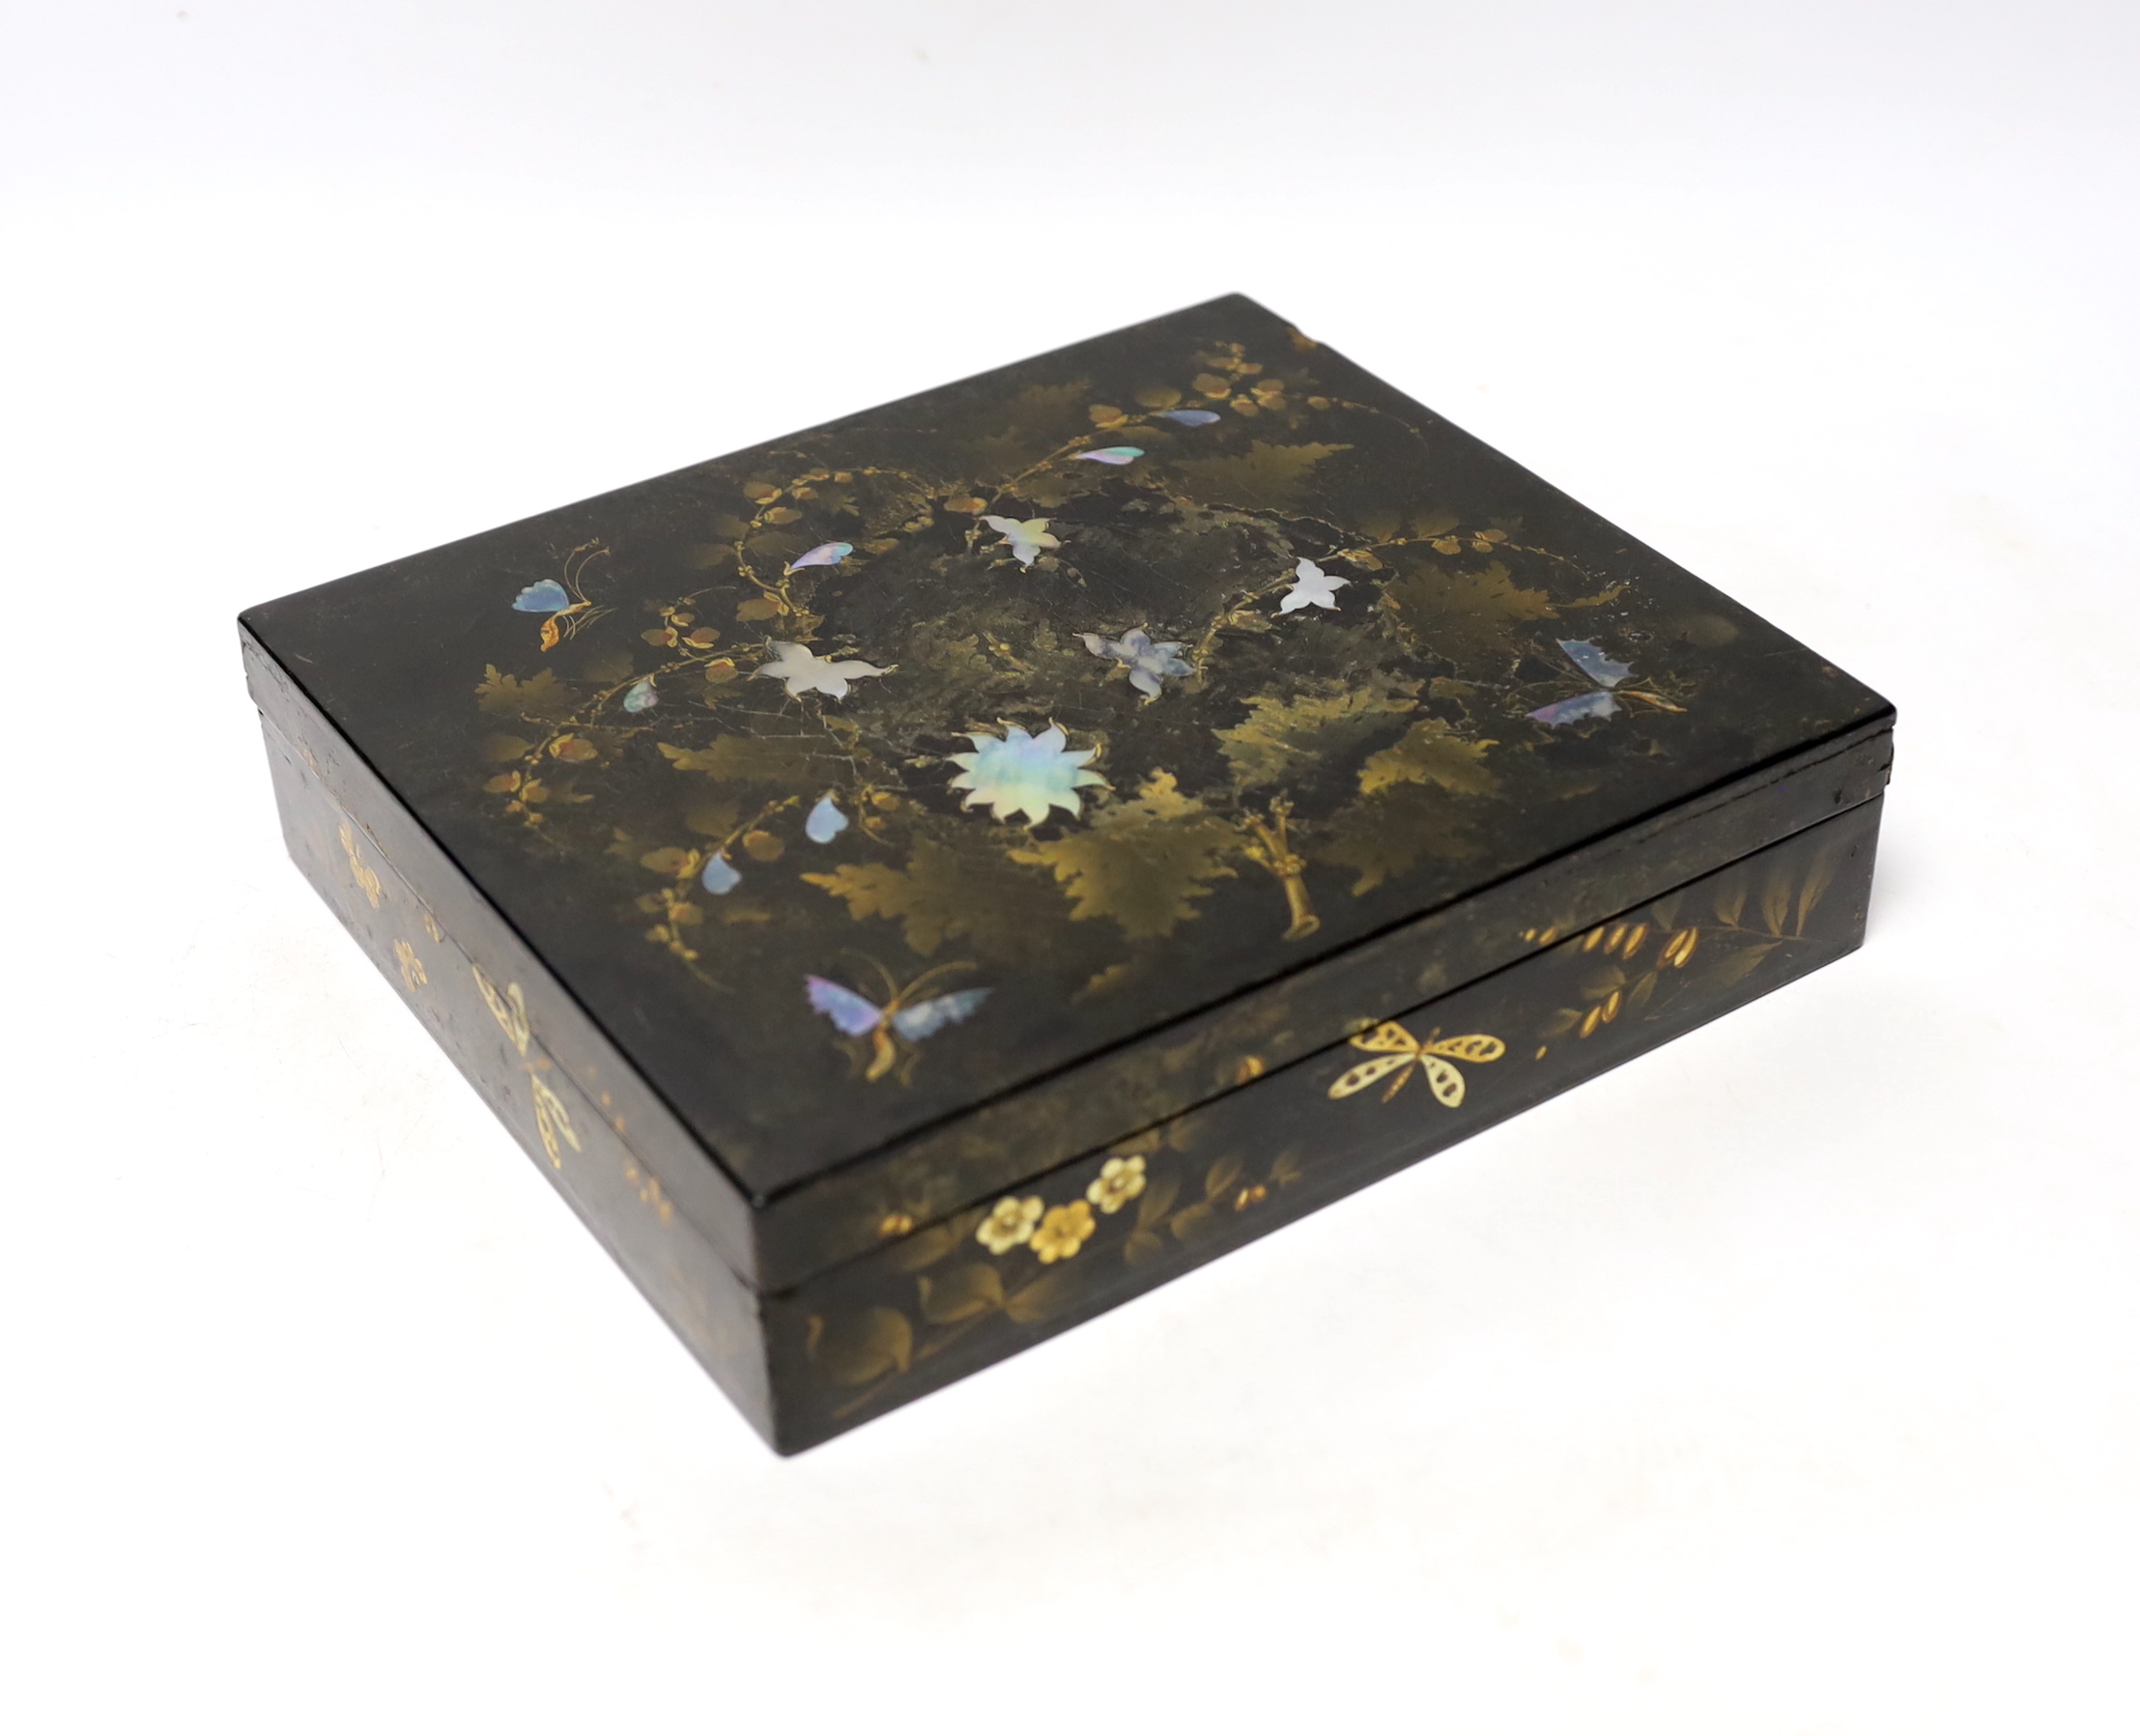 A 19th century lacquer games box with sectional interior and a collection of 49 mother of pearl gaming counters, some armorial, 22 x 19 x 5cm